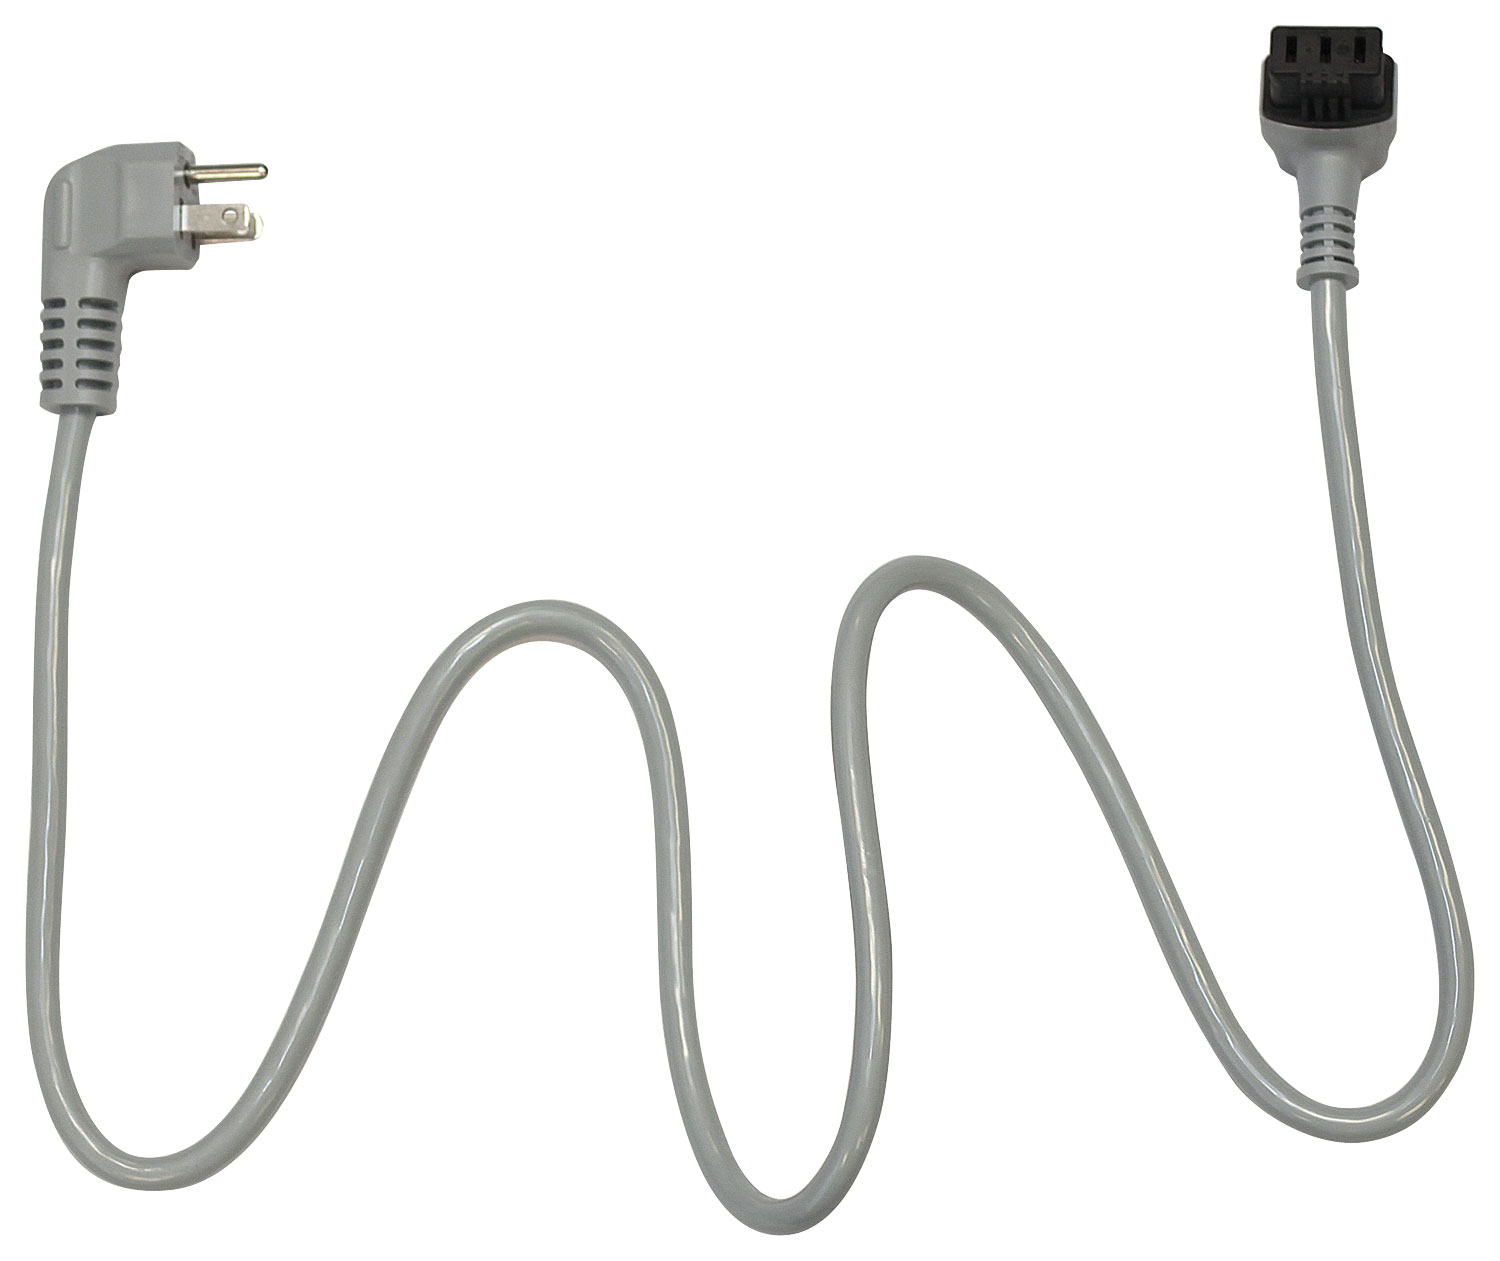 3-Prong Power Cord Kit for Select Bosch Dishwashers - Gray